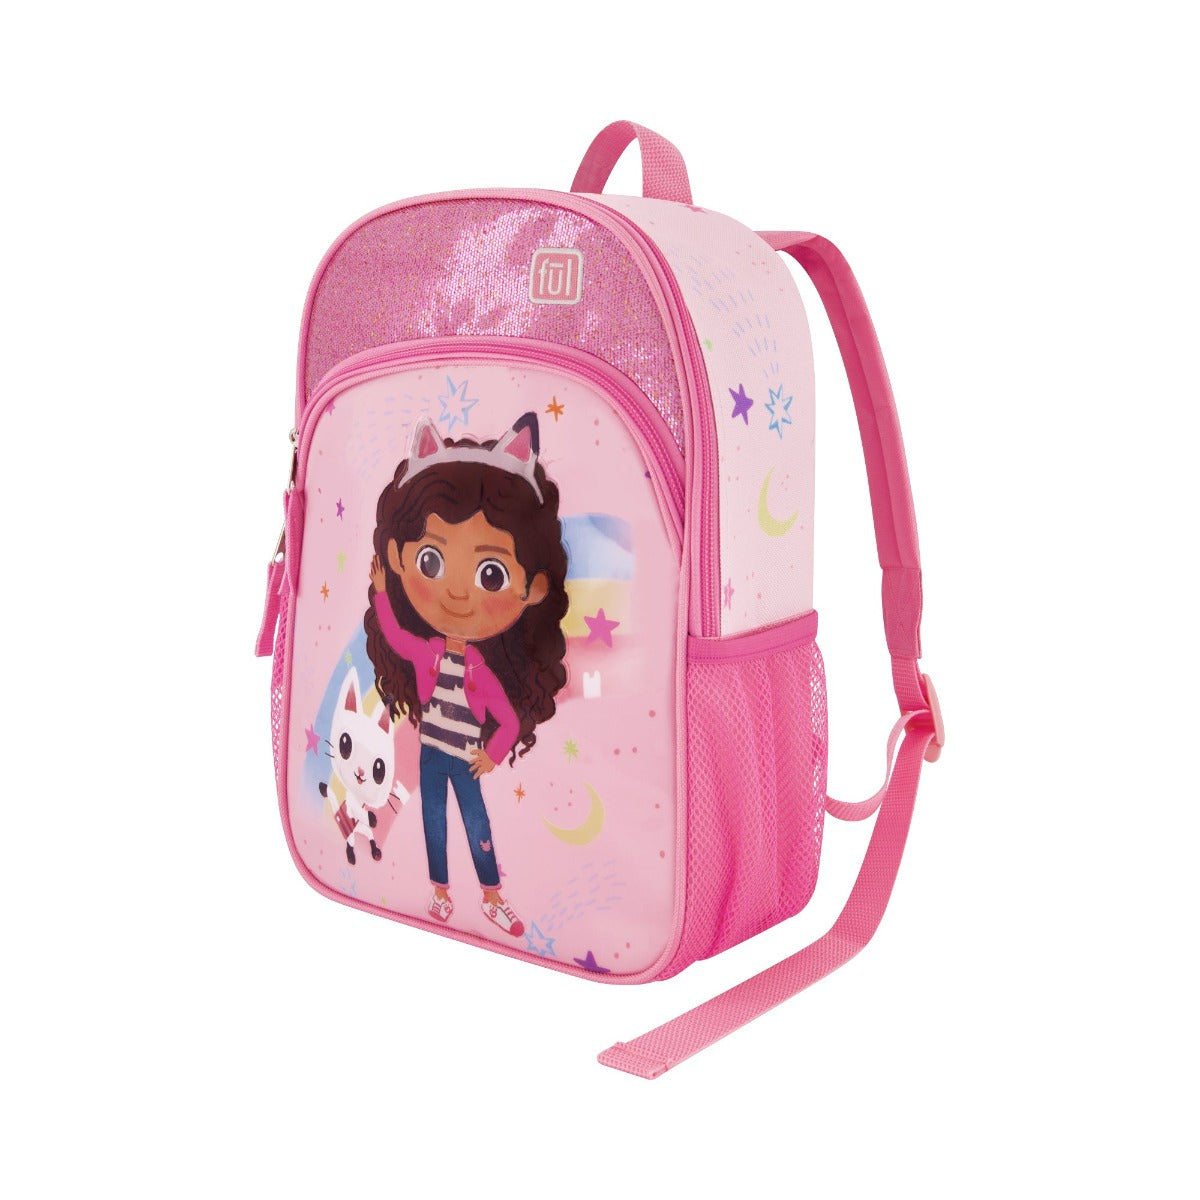 Gabby's Dollhouse sketch your dreams matching 2 piece set - 13 inch kids carry-on backpack for traveling